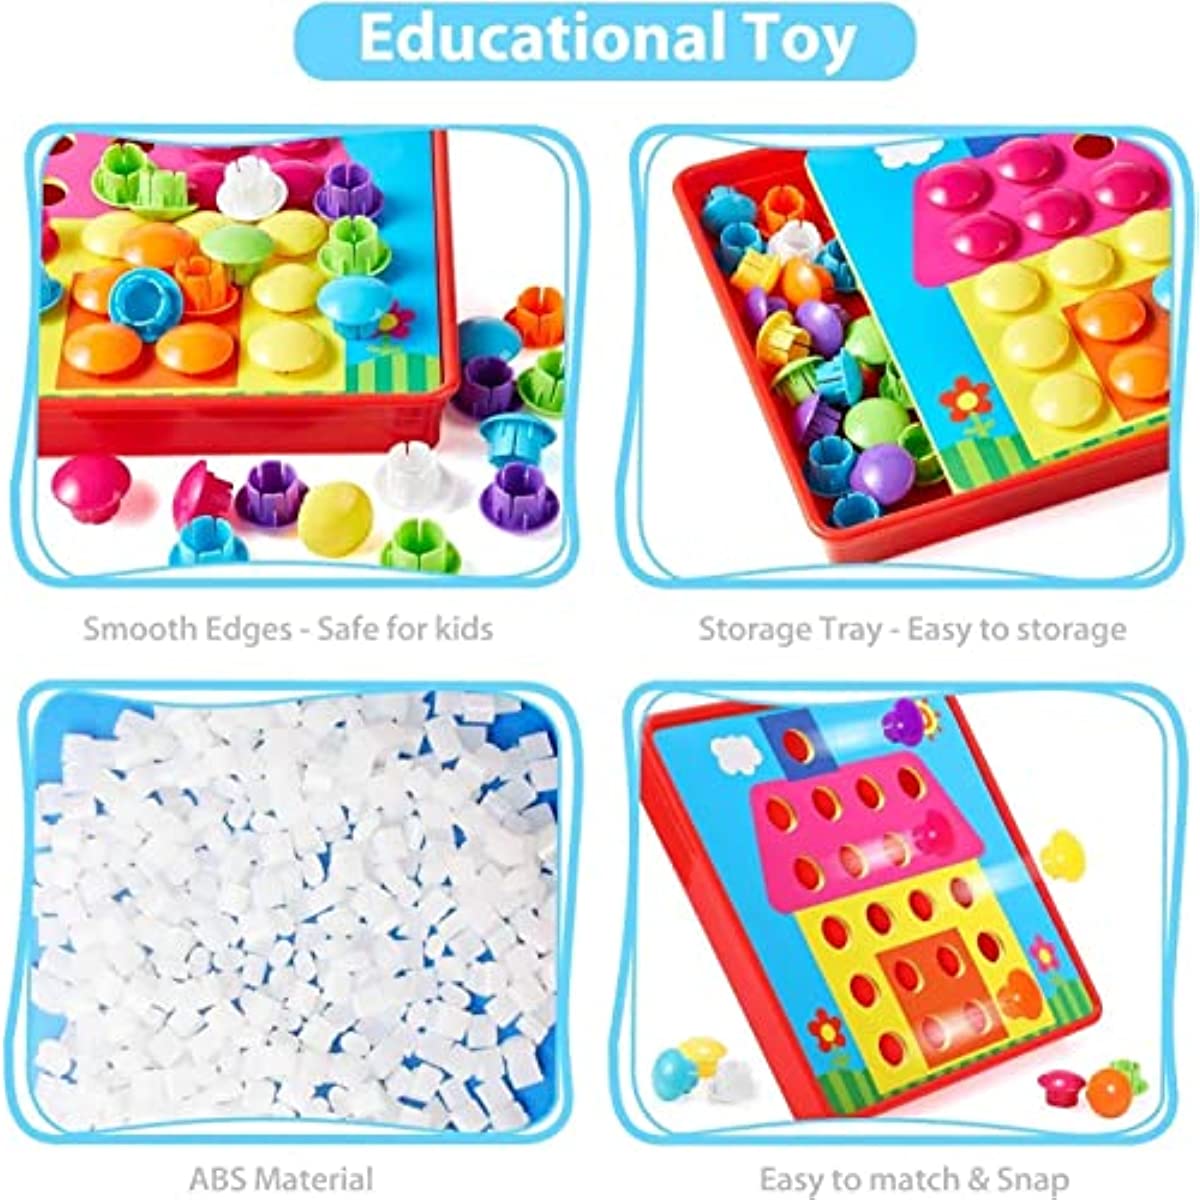 Button Art Puzzle Toy for Toddlers Activities Crafts Color Matching Early Learning Educational Pegboard 46 Buttons 10 Pictures